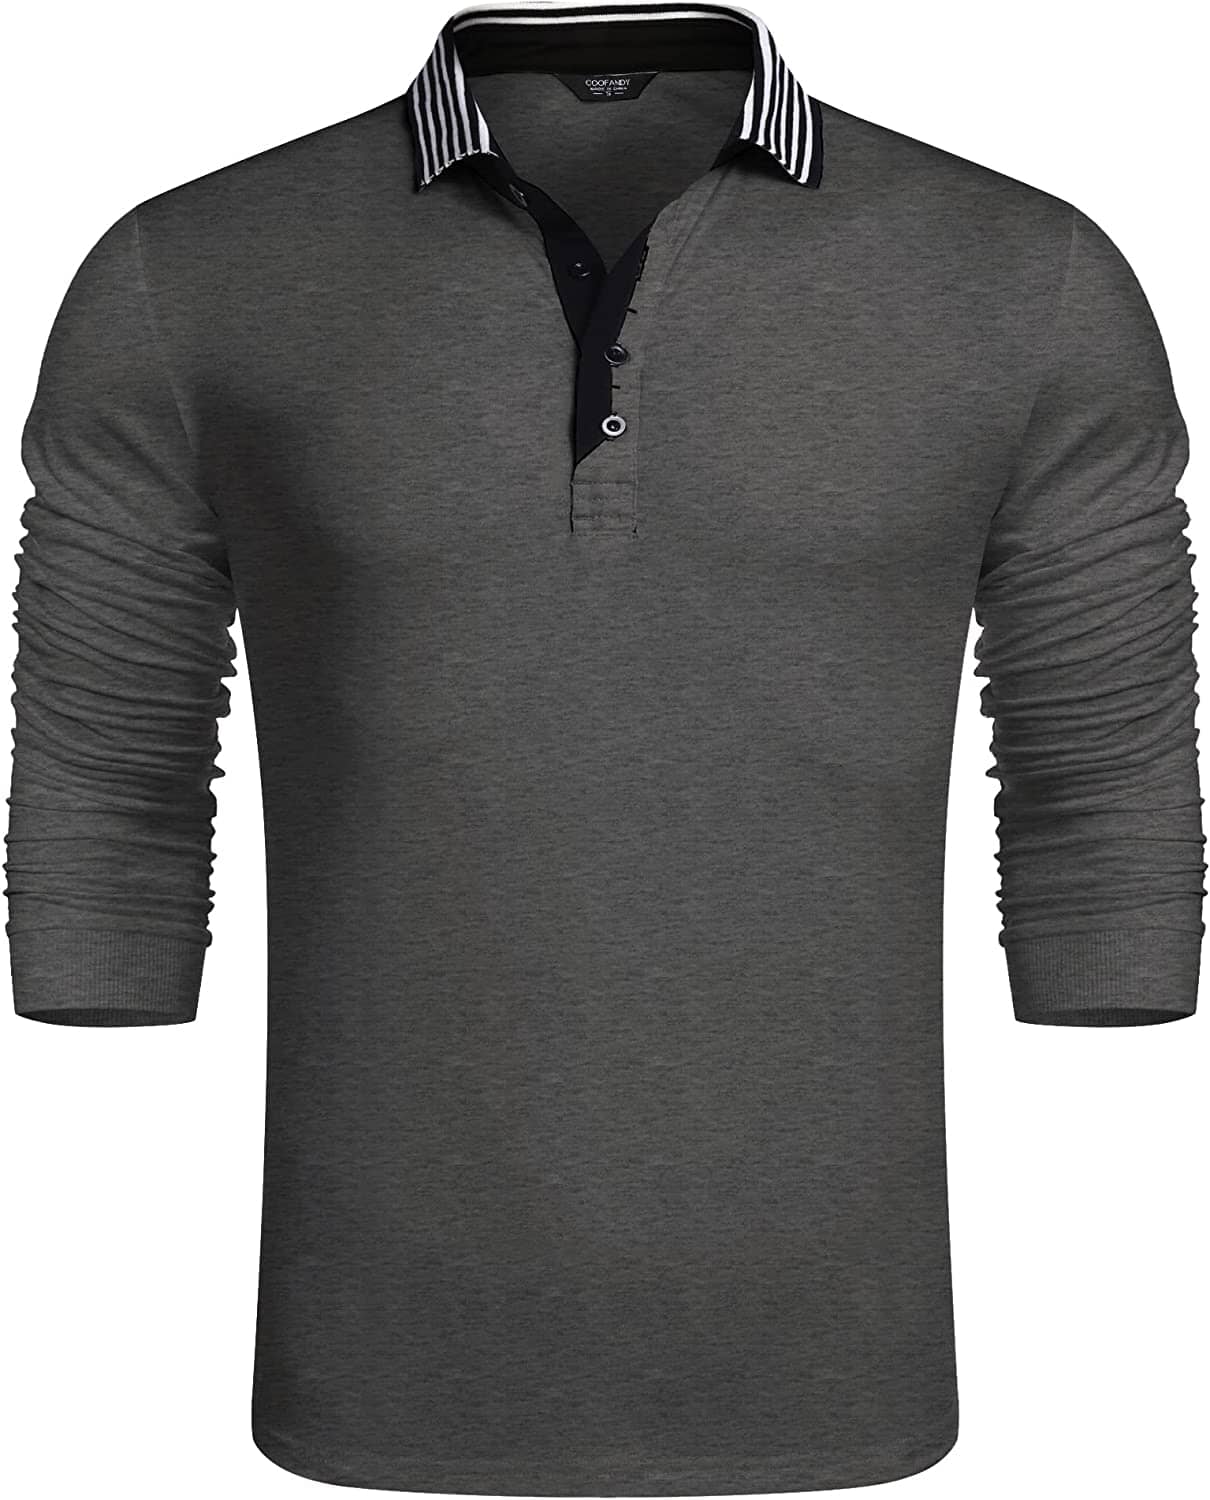 Slim Fit Cotton Polo Shirt (US Only) Shirts & Polos COOFANDY Store Dark Grey S 